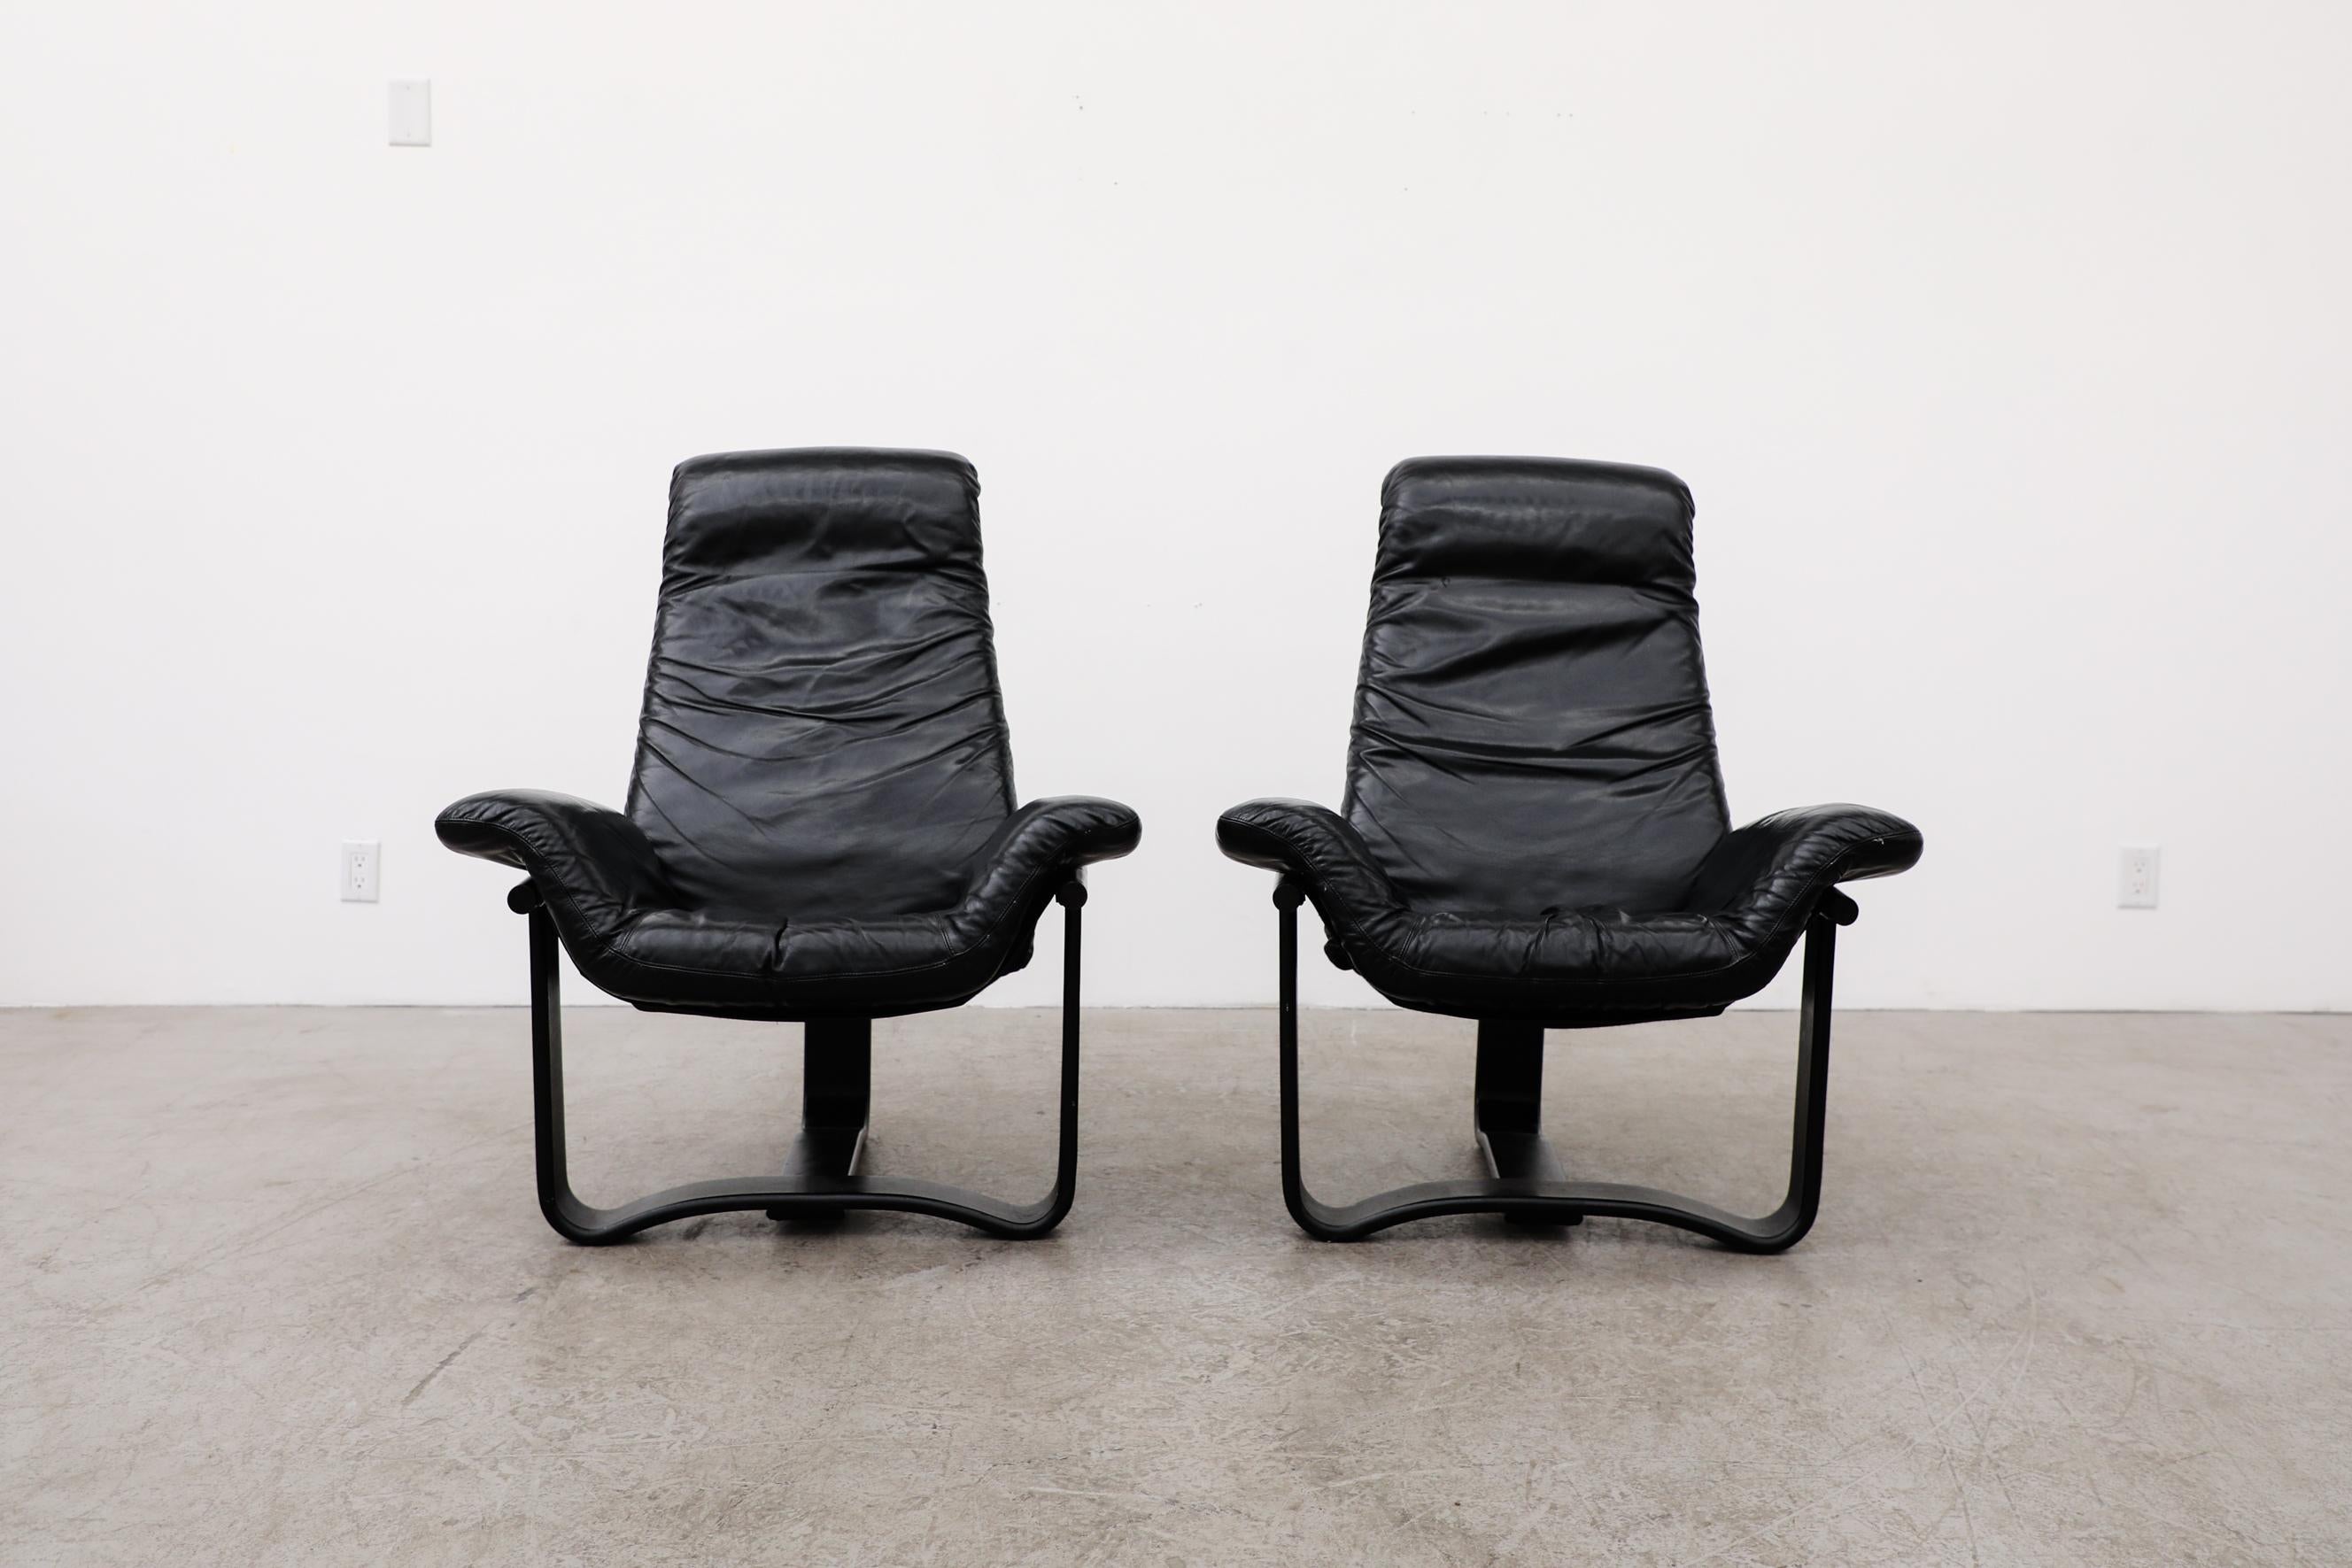 These 1960's-70's Westnofa lounge chairs have a black bentwood frame with mesh sling support and black leather cushions. Both chairs are in good original condition with normal wear to leather and wood frames. Set price.